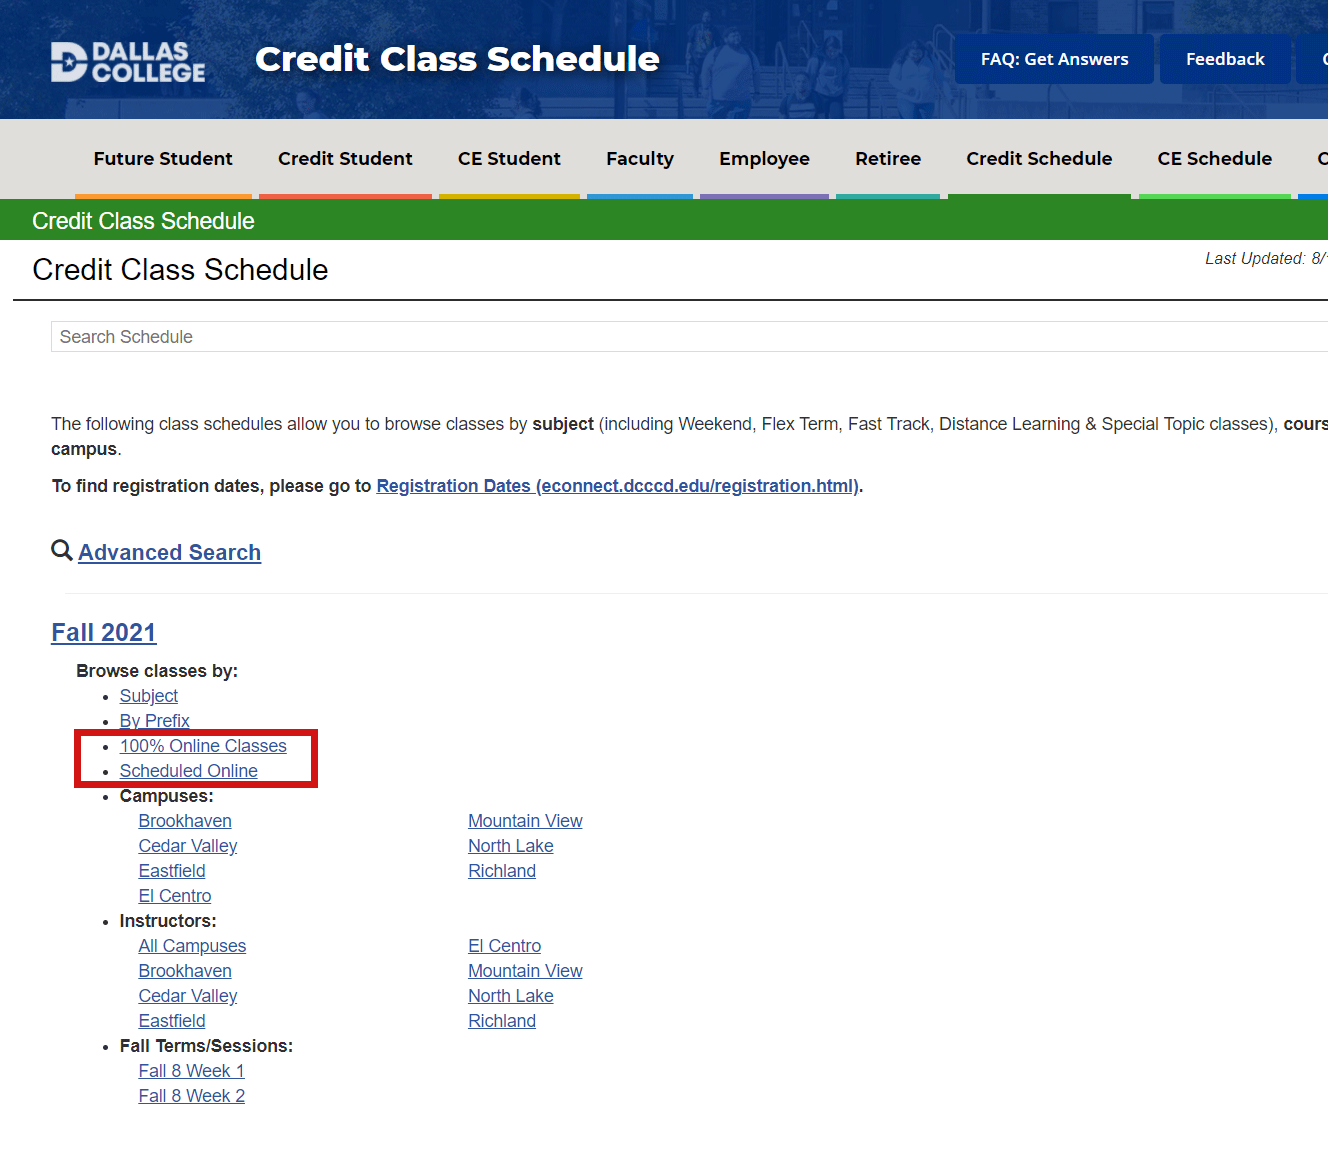 Screenshot of eConnect Browsable Class Schedules page. Link for 100% Online Classes is marked in red under browse classes by.